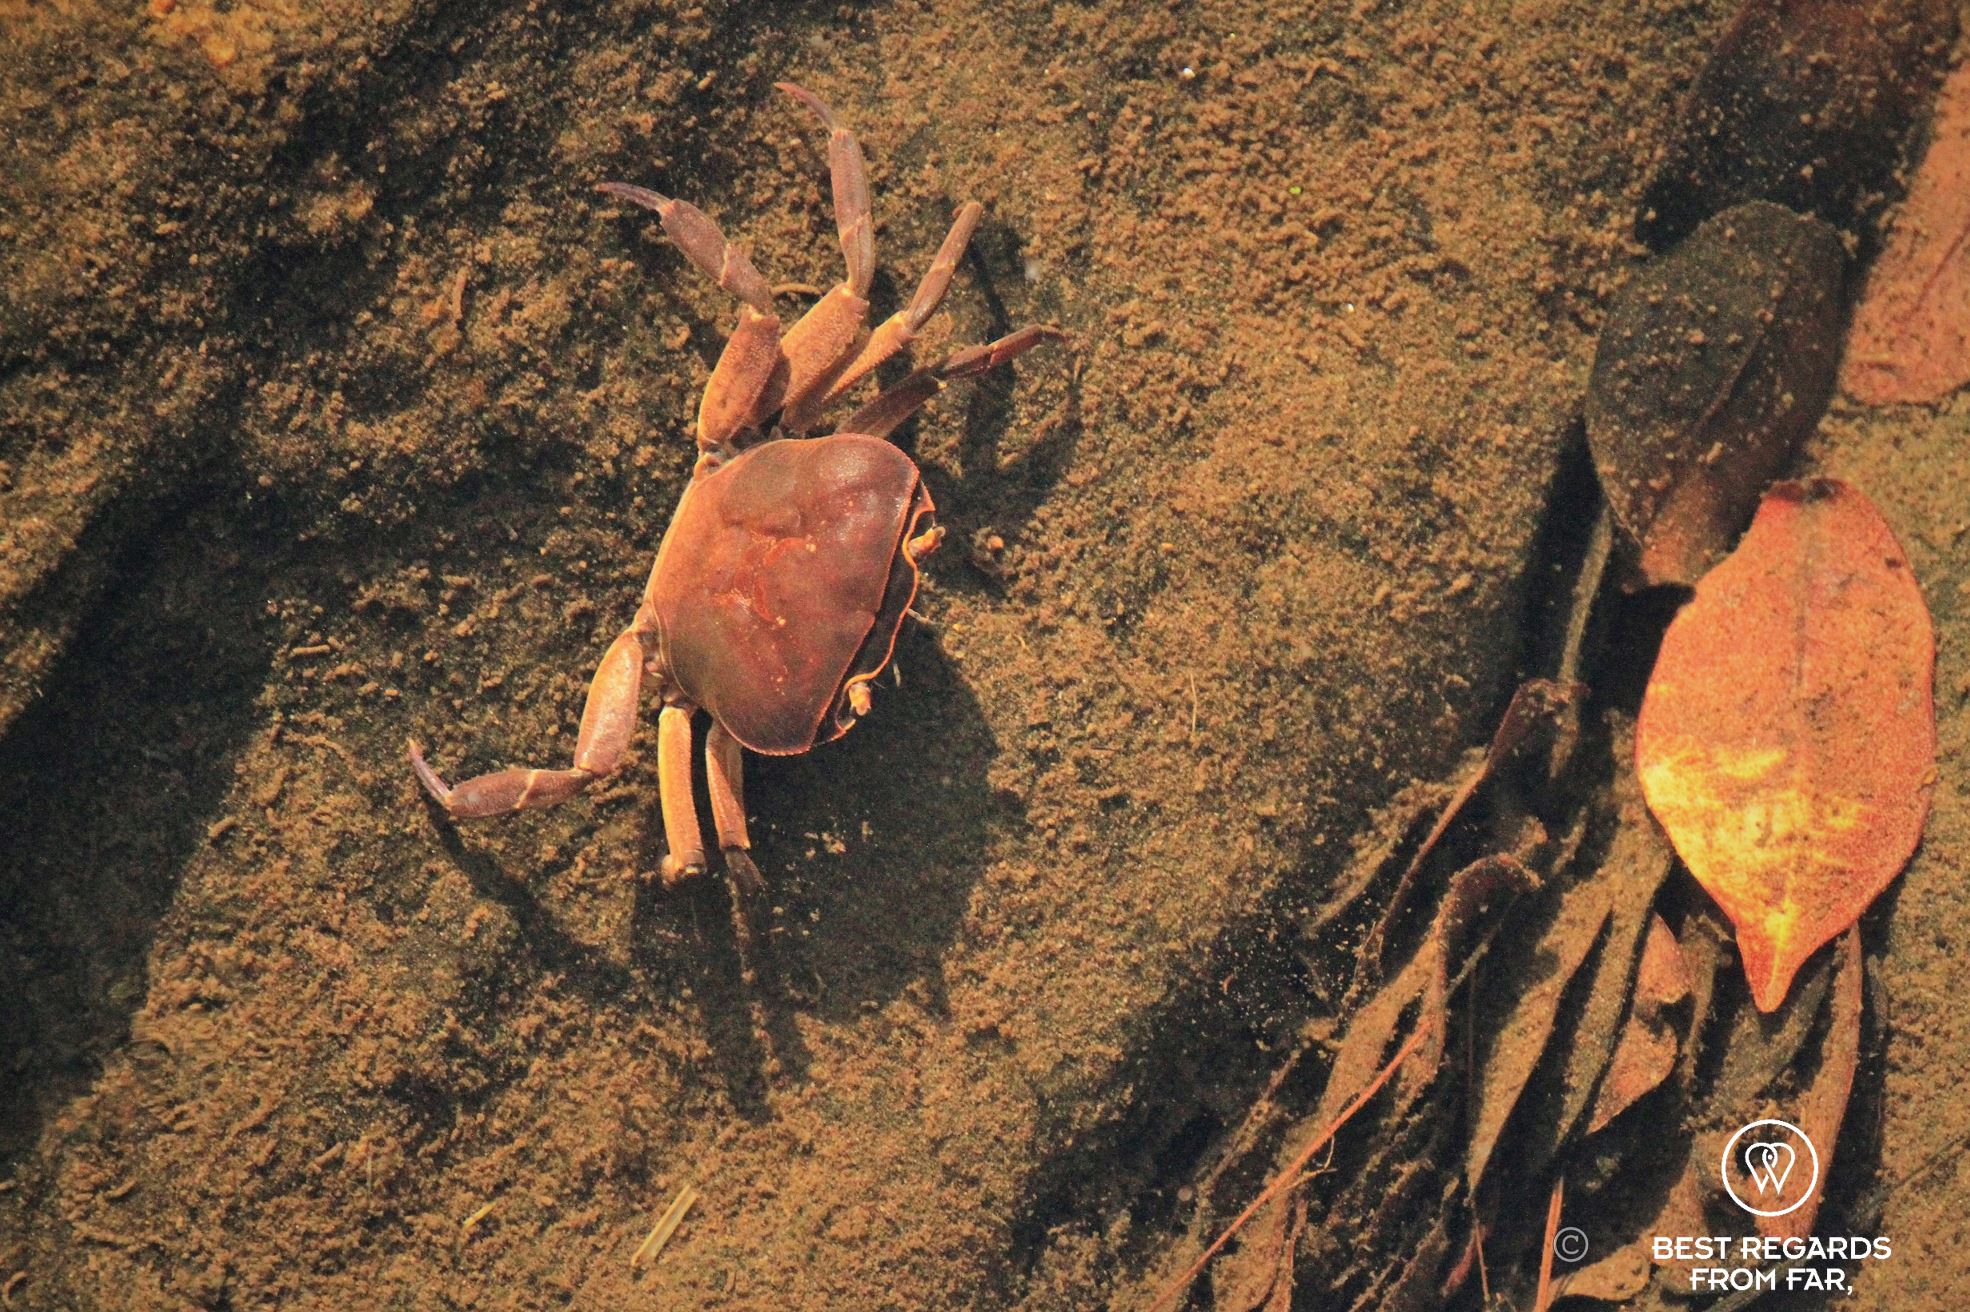 Fresh water crab in the Mac Mac Pools, Sabie, Blyde River Canyon, South Africa